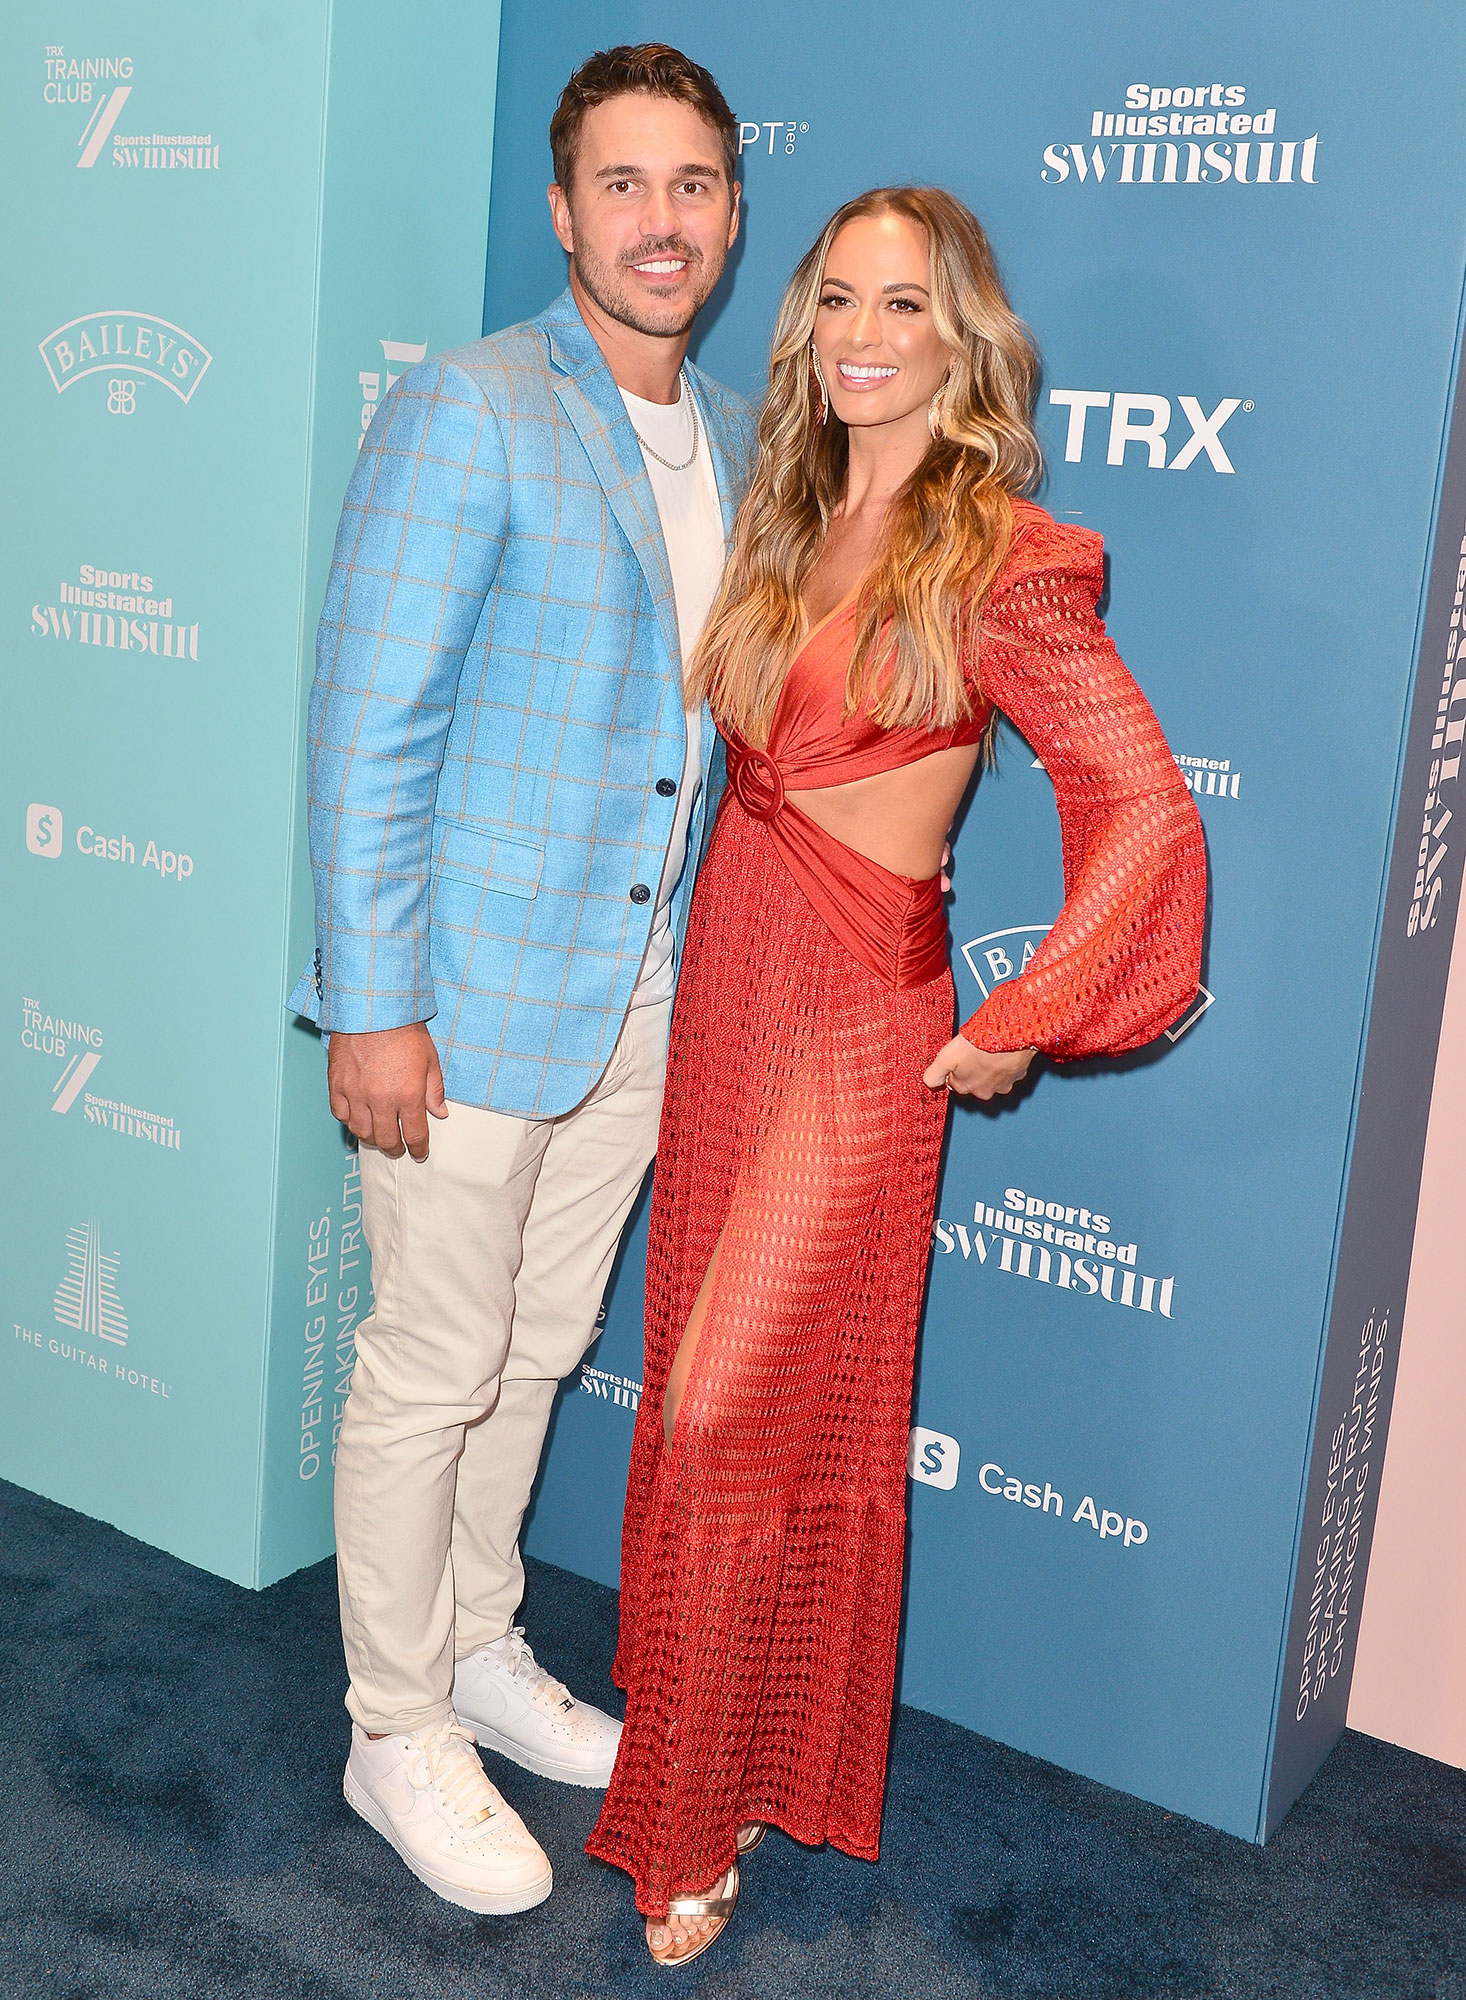 Golfer Brooks Koepka And Jena Sims A Love Story In The Making